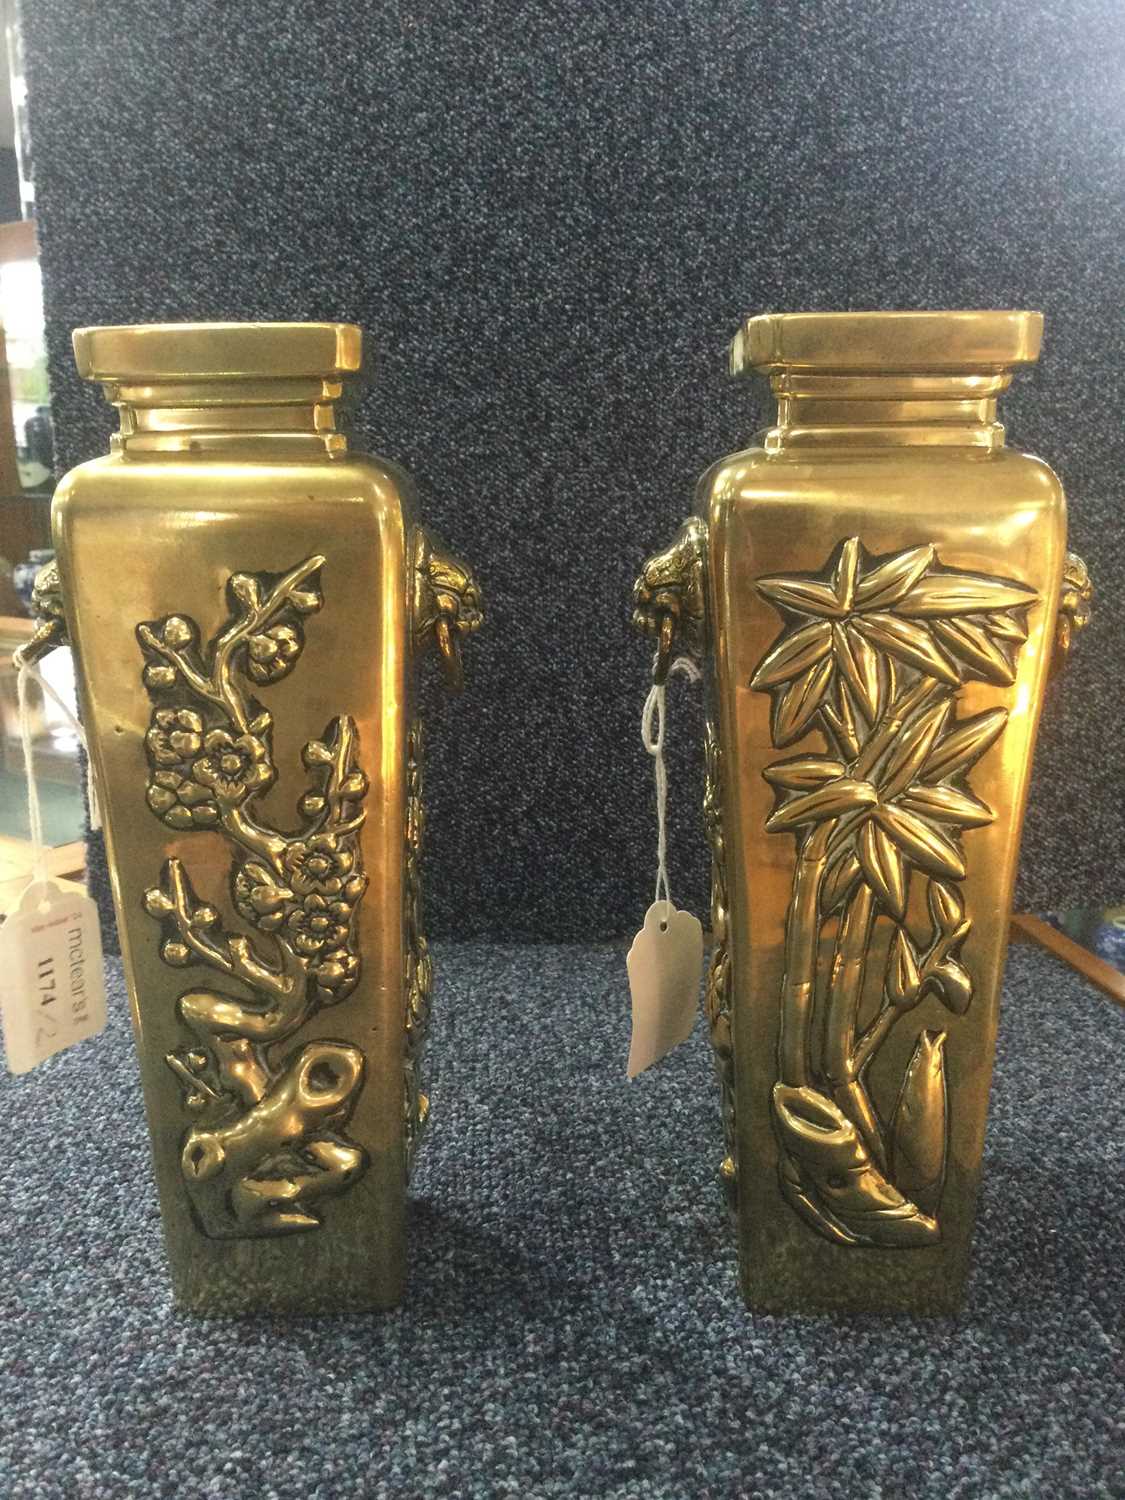 PAIR OF CHINESE BRASS VASES, EARLY 20TH CENTURY - Image 2 of 8